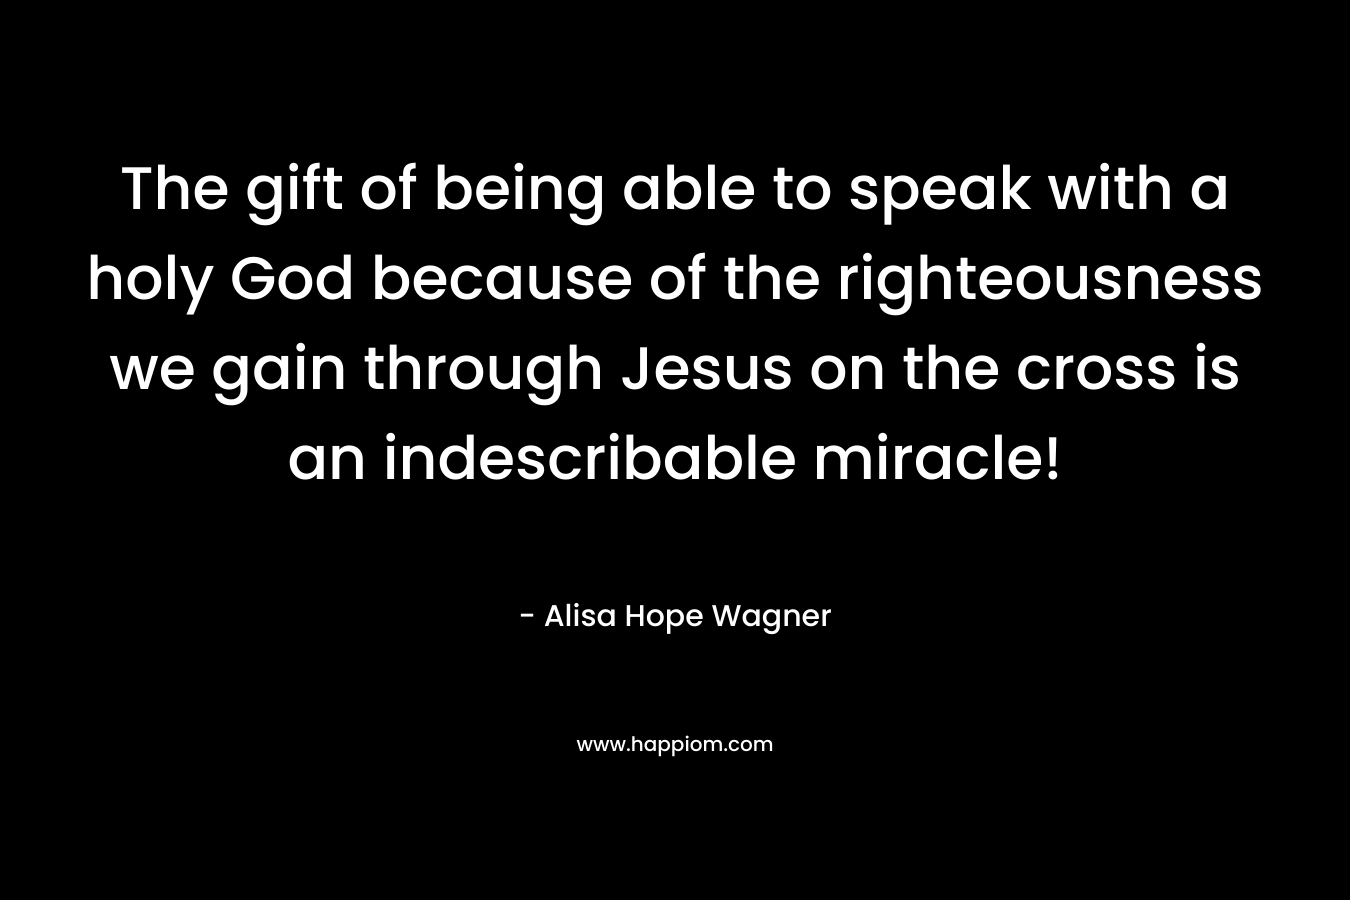 The gift of being able to speak with a holy God because of the righteousness we gain through Jesus on the cross is an indescribable miracle!